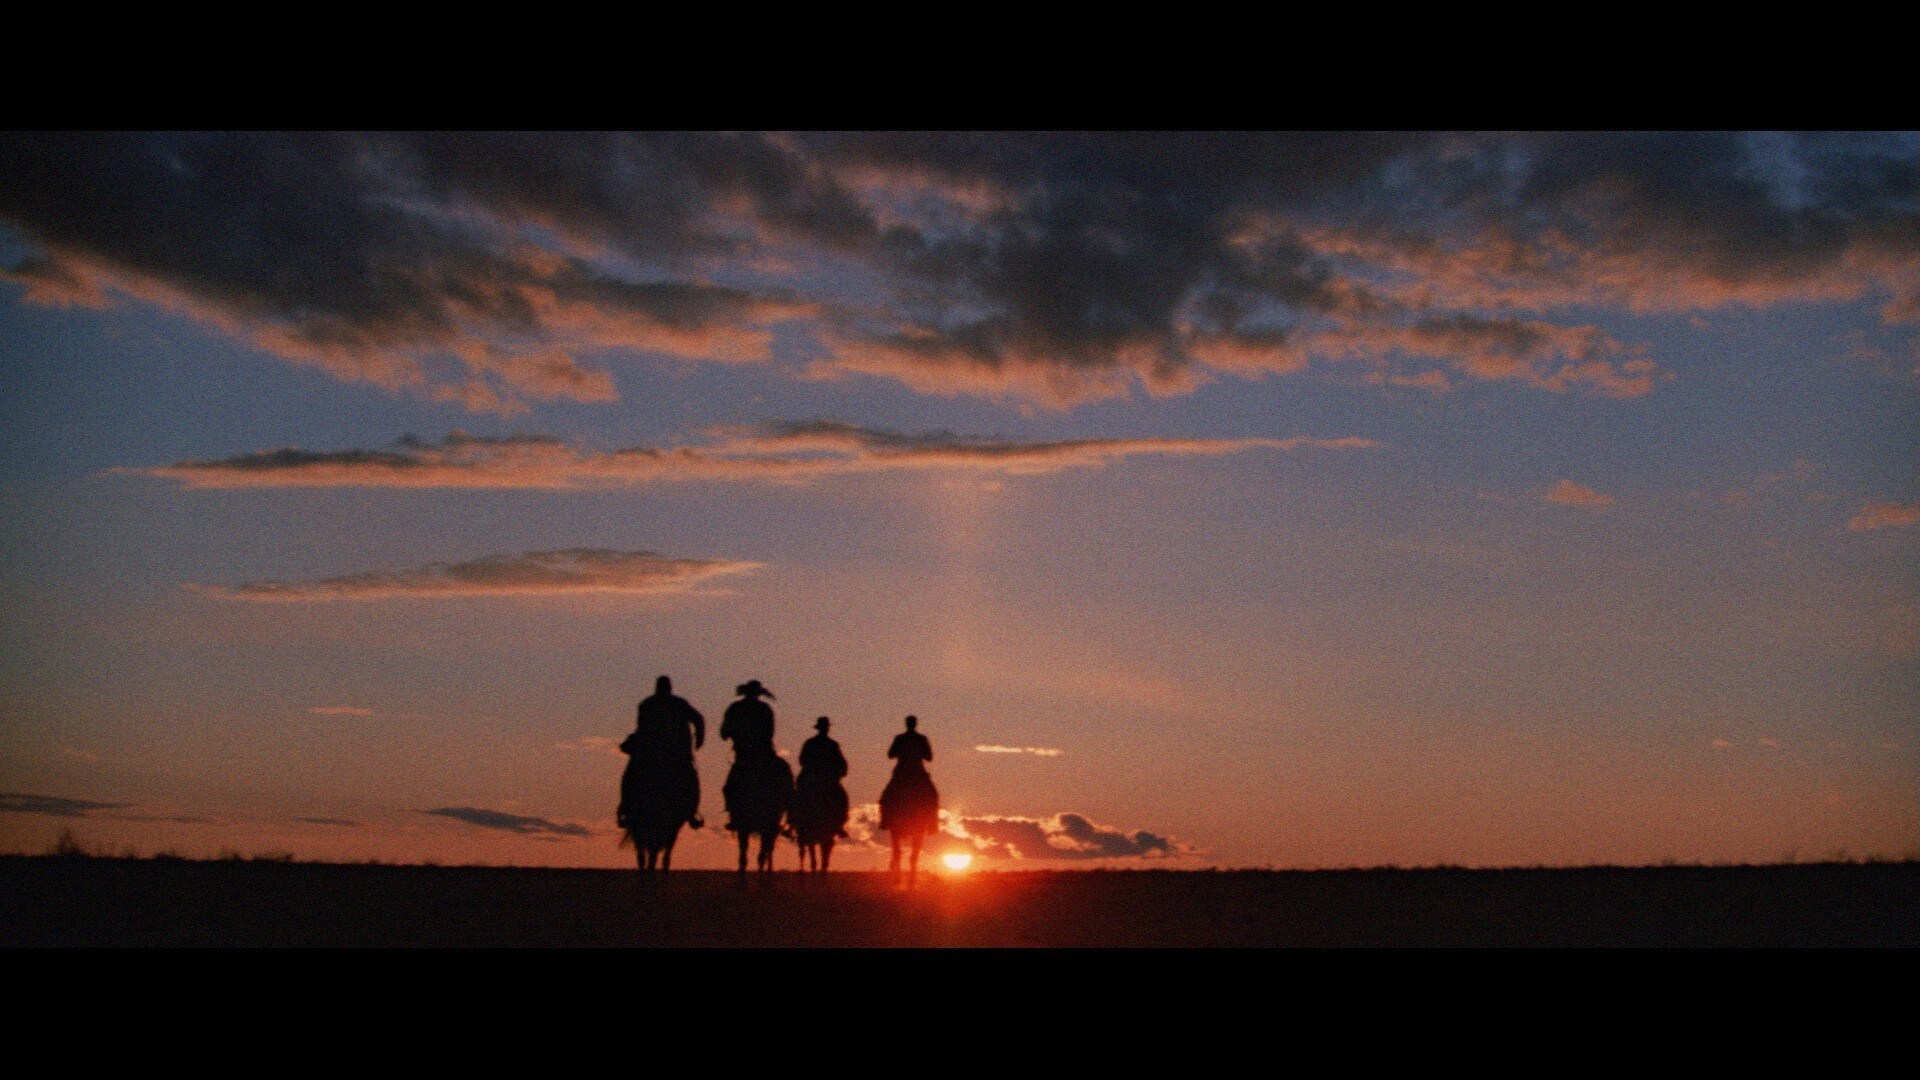 The script specifically says the heroes ride off "like the end of The Last Crusade."